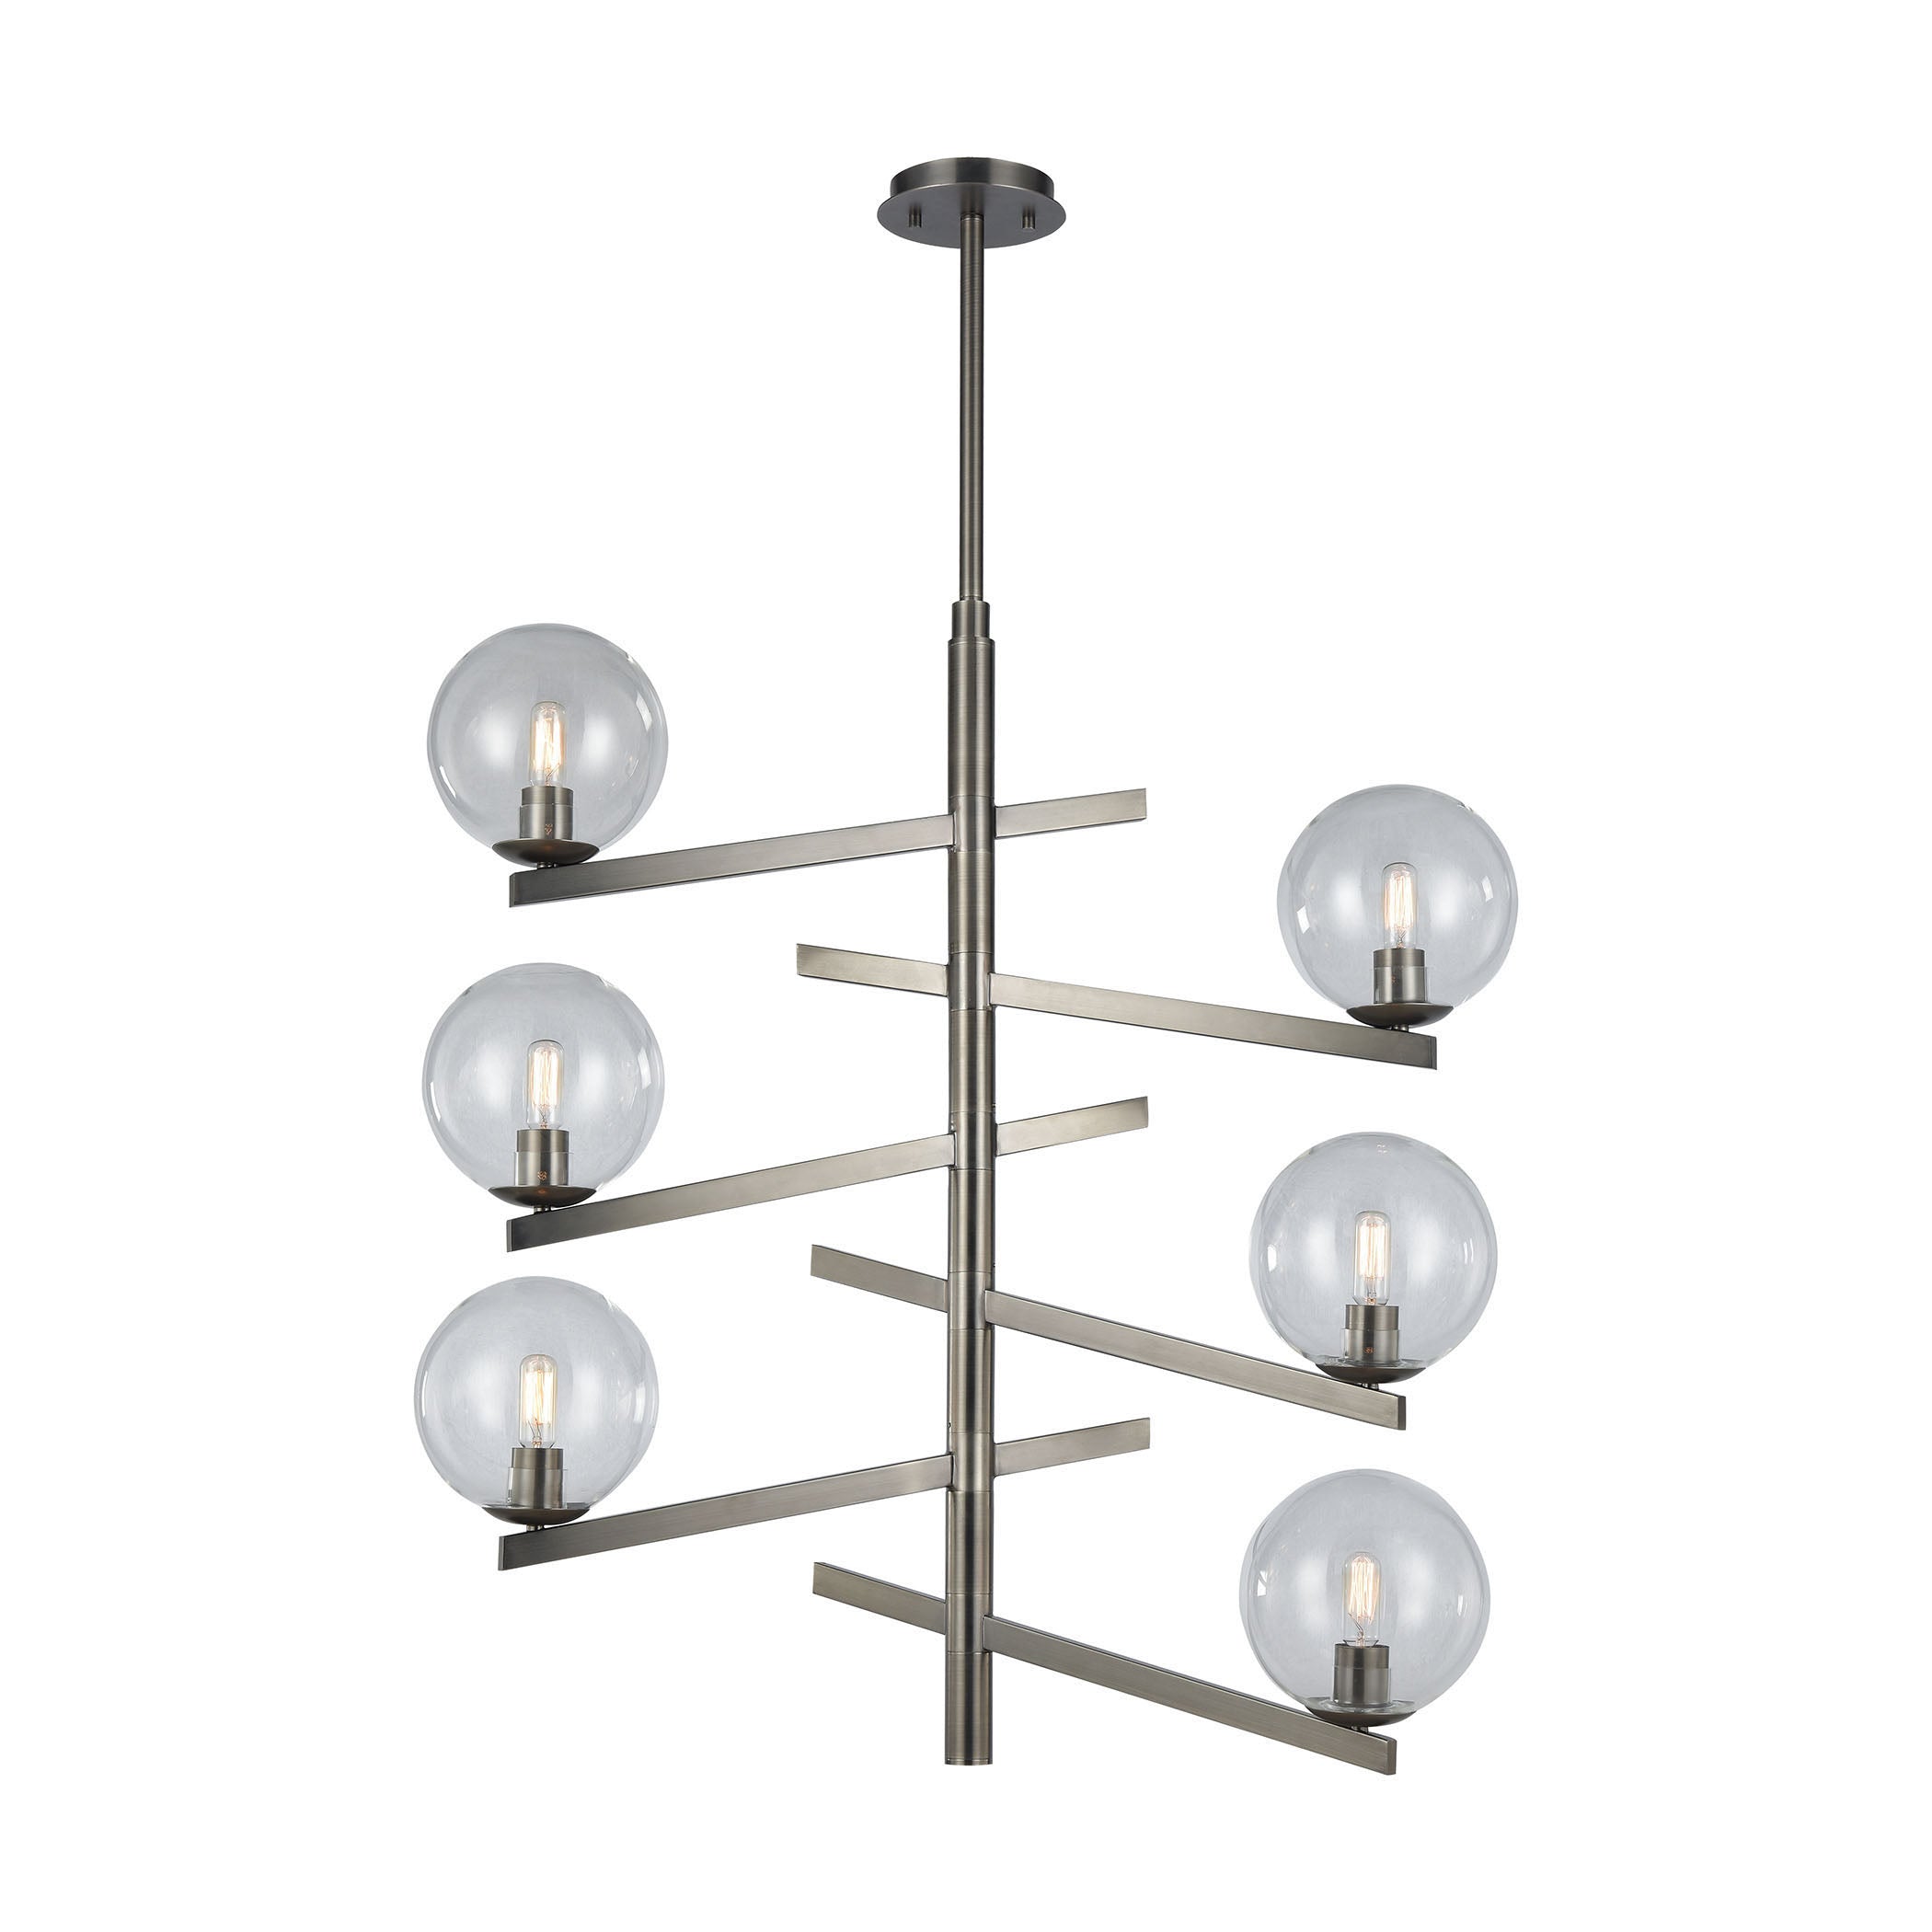 ELK Lighting 12183/6 Globes of Light 6-Light Chandelier in Brushed Black Nickel with Clear Blown Glass